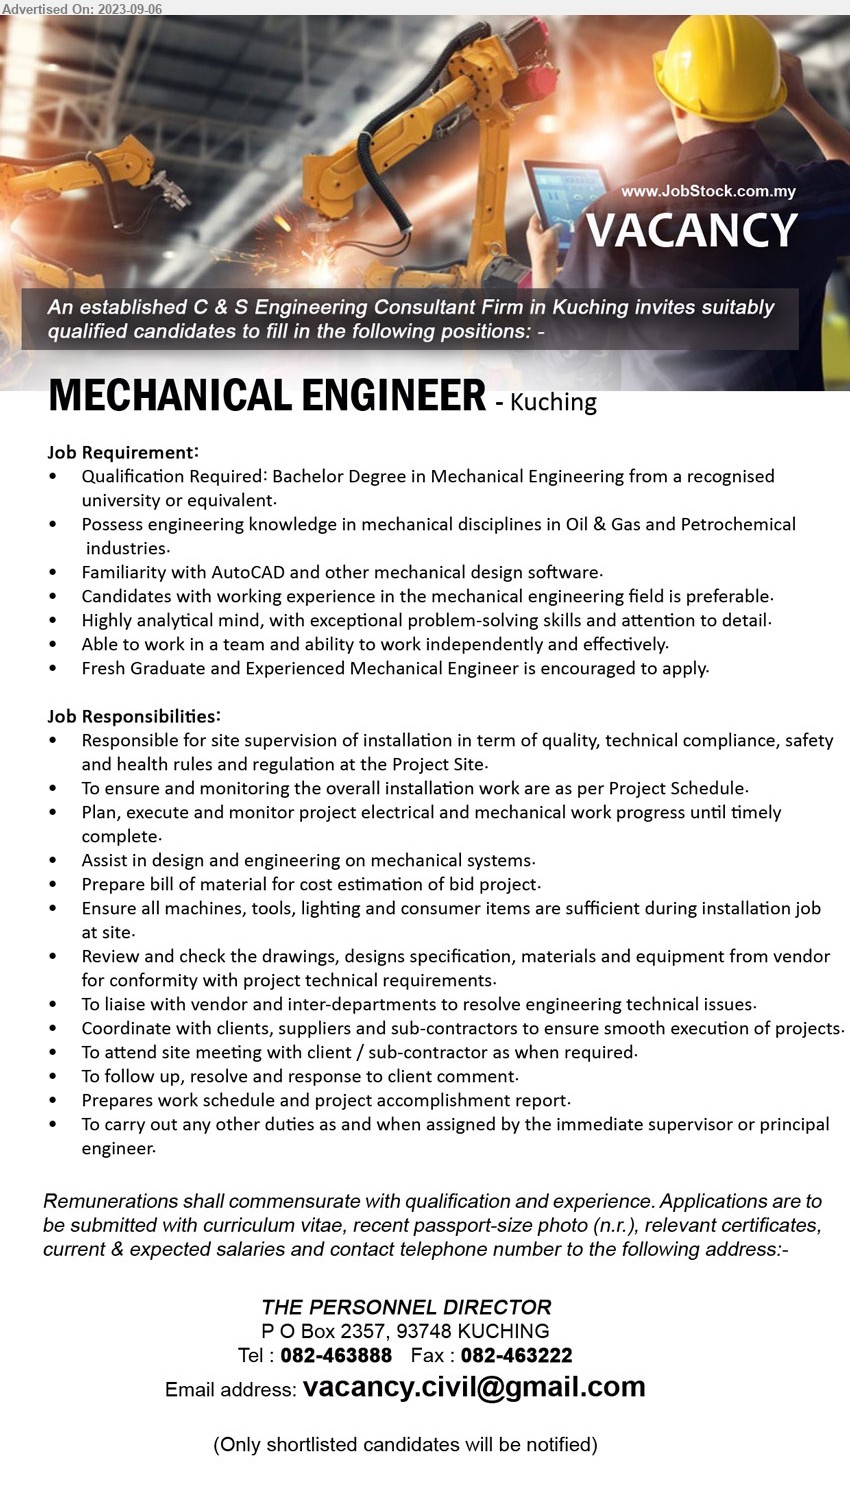 ADVERTISER (C & S Consultant Firm) - MECHANICAL ENGINEER (Kuching), Bachelor Degree in Mechanical Engineering, Possess engineering knowledge in mechanical disciplines in Oil & Gas and Petrochemical industries.,...
Call 082-463888  / Email resume to ...
